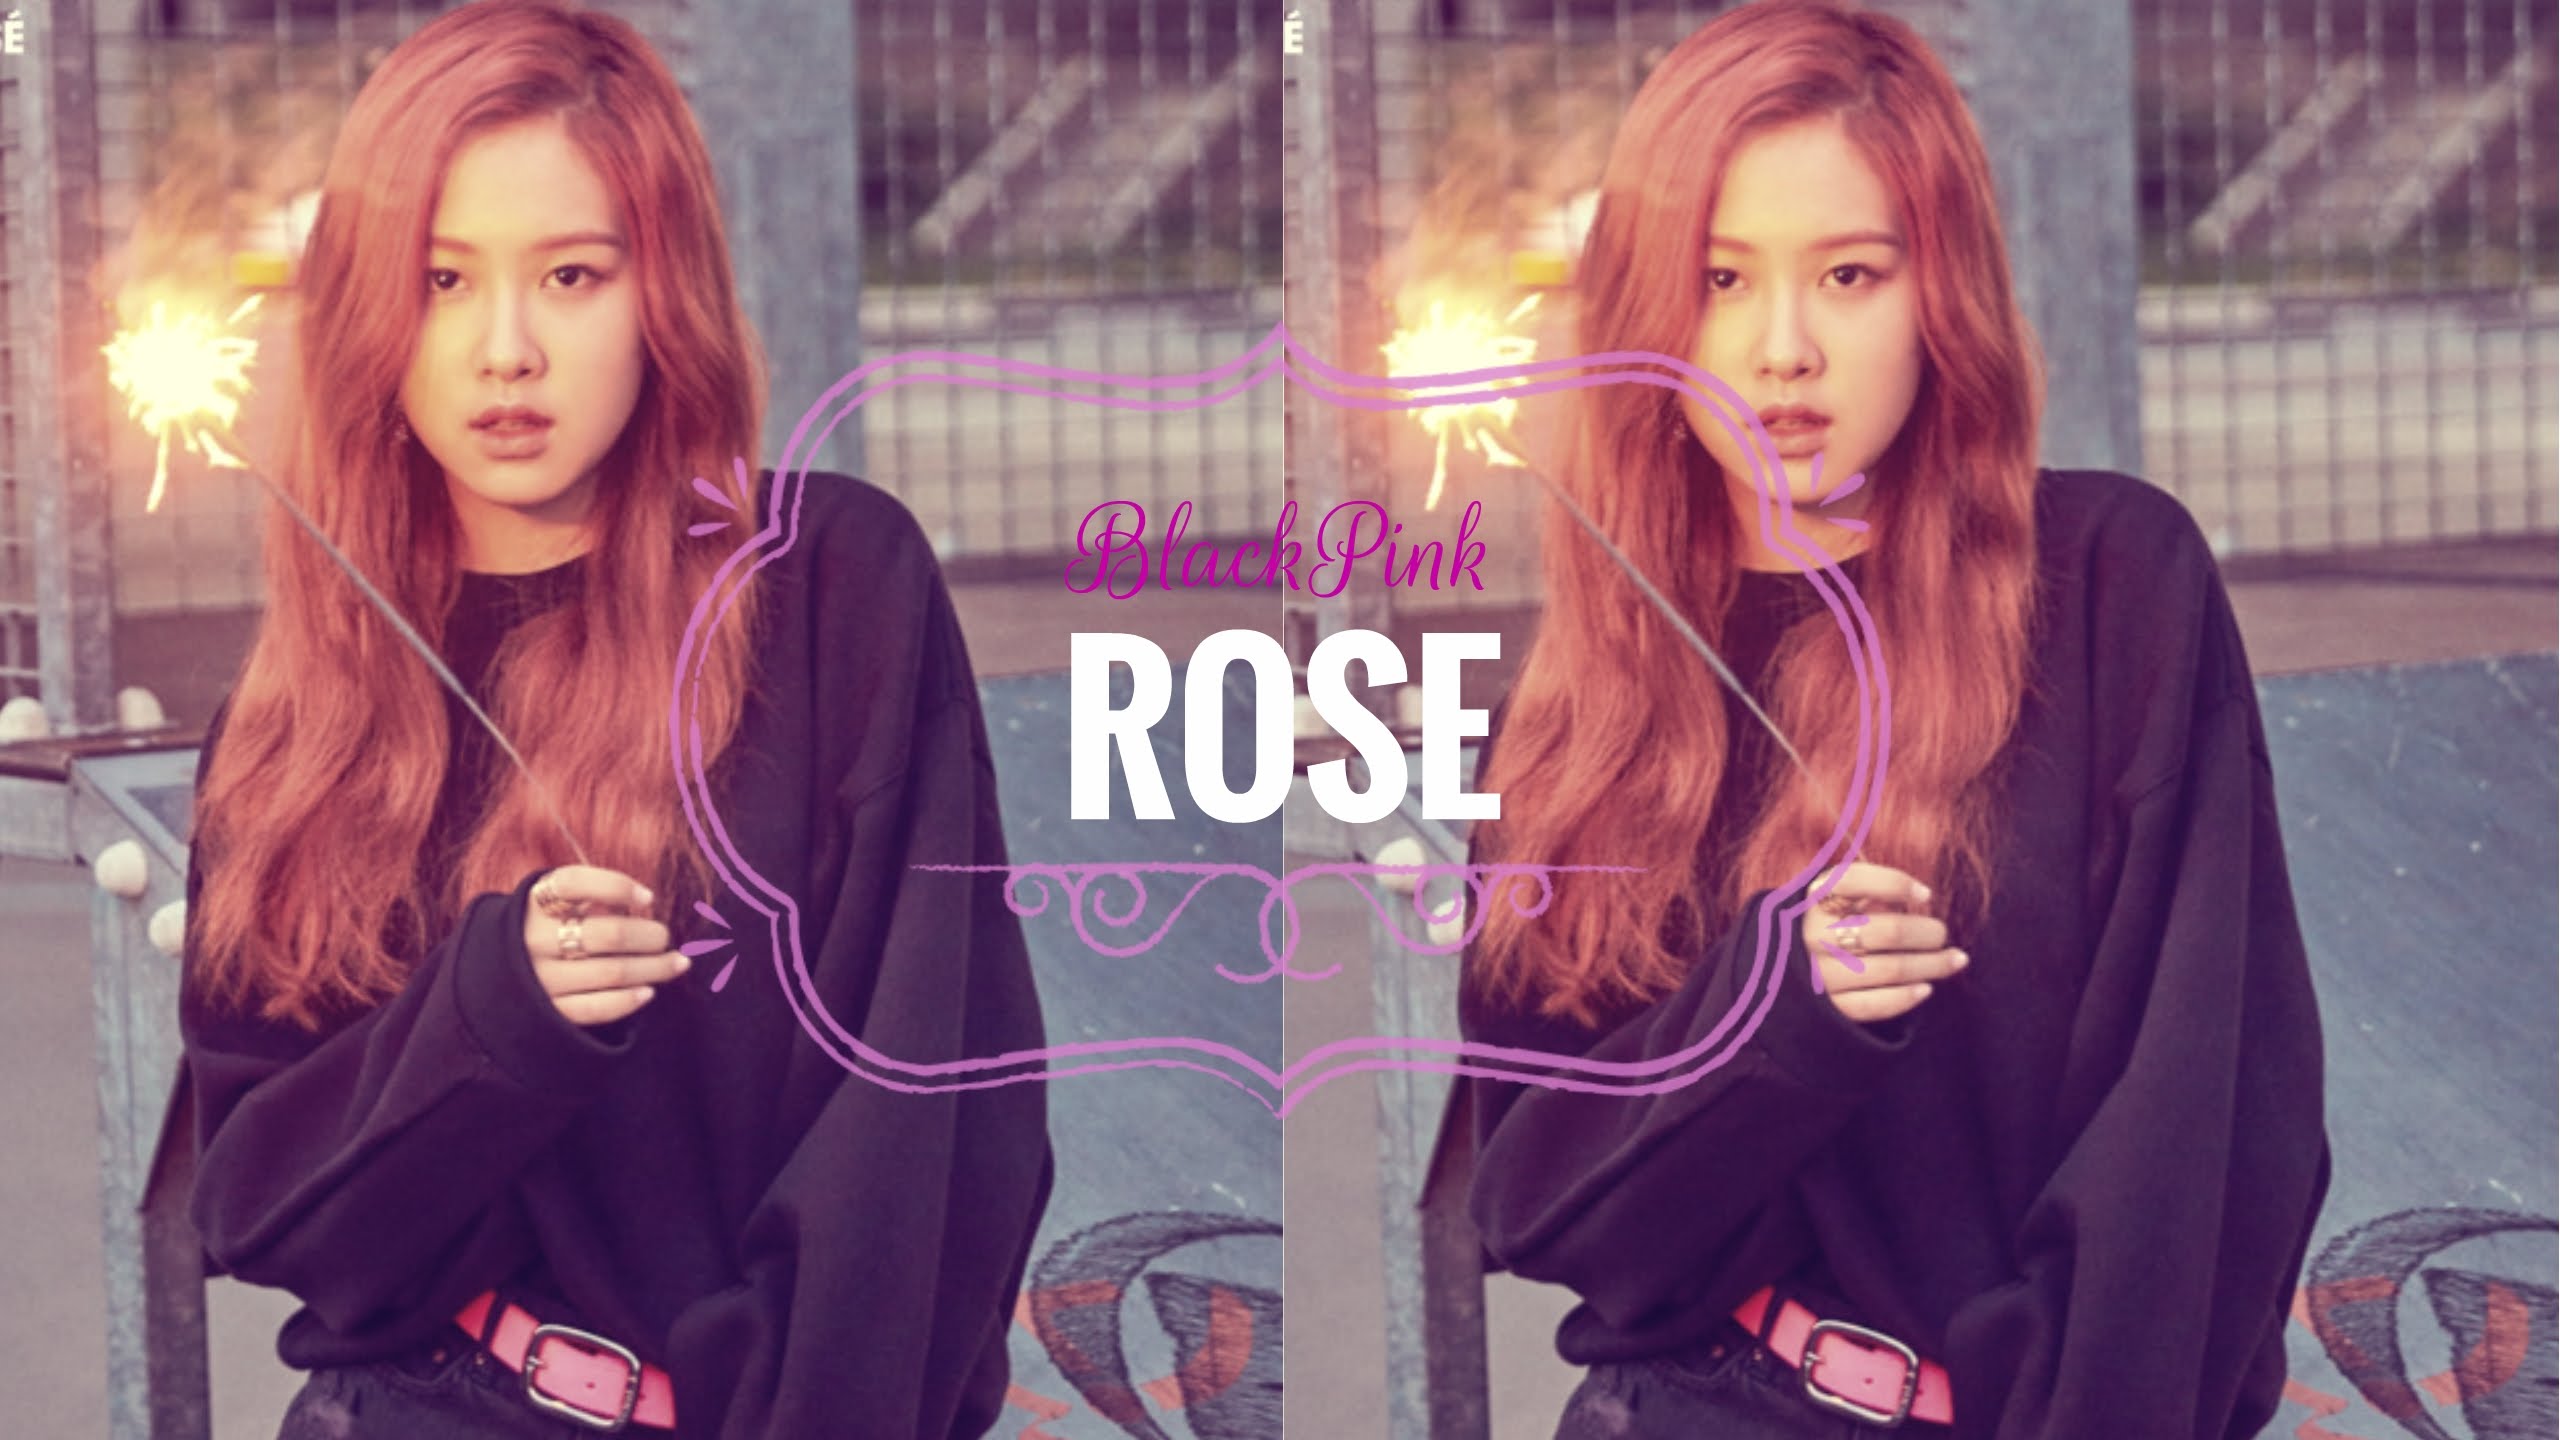 Black Pink Image Rose HD Wallpaper And Background Photos